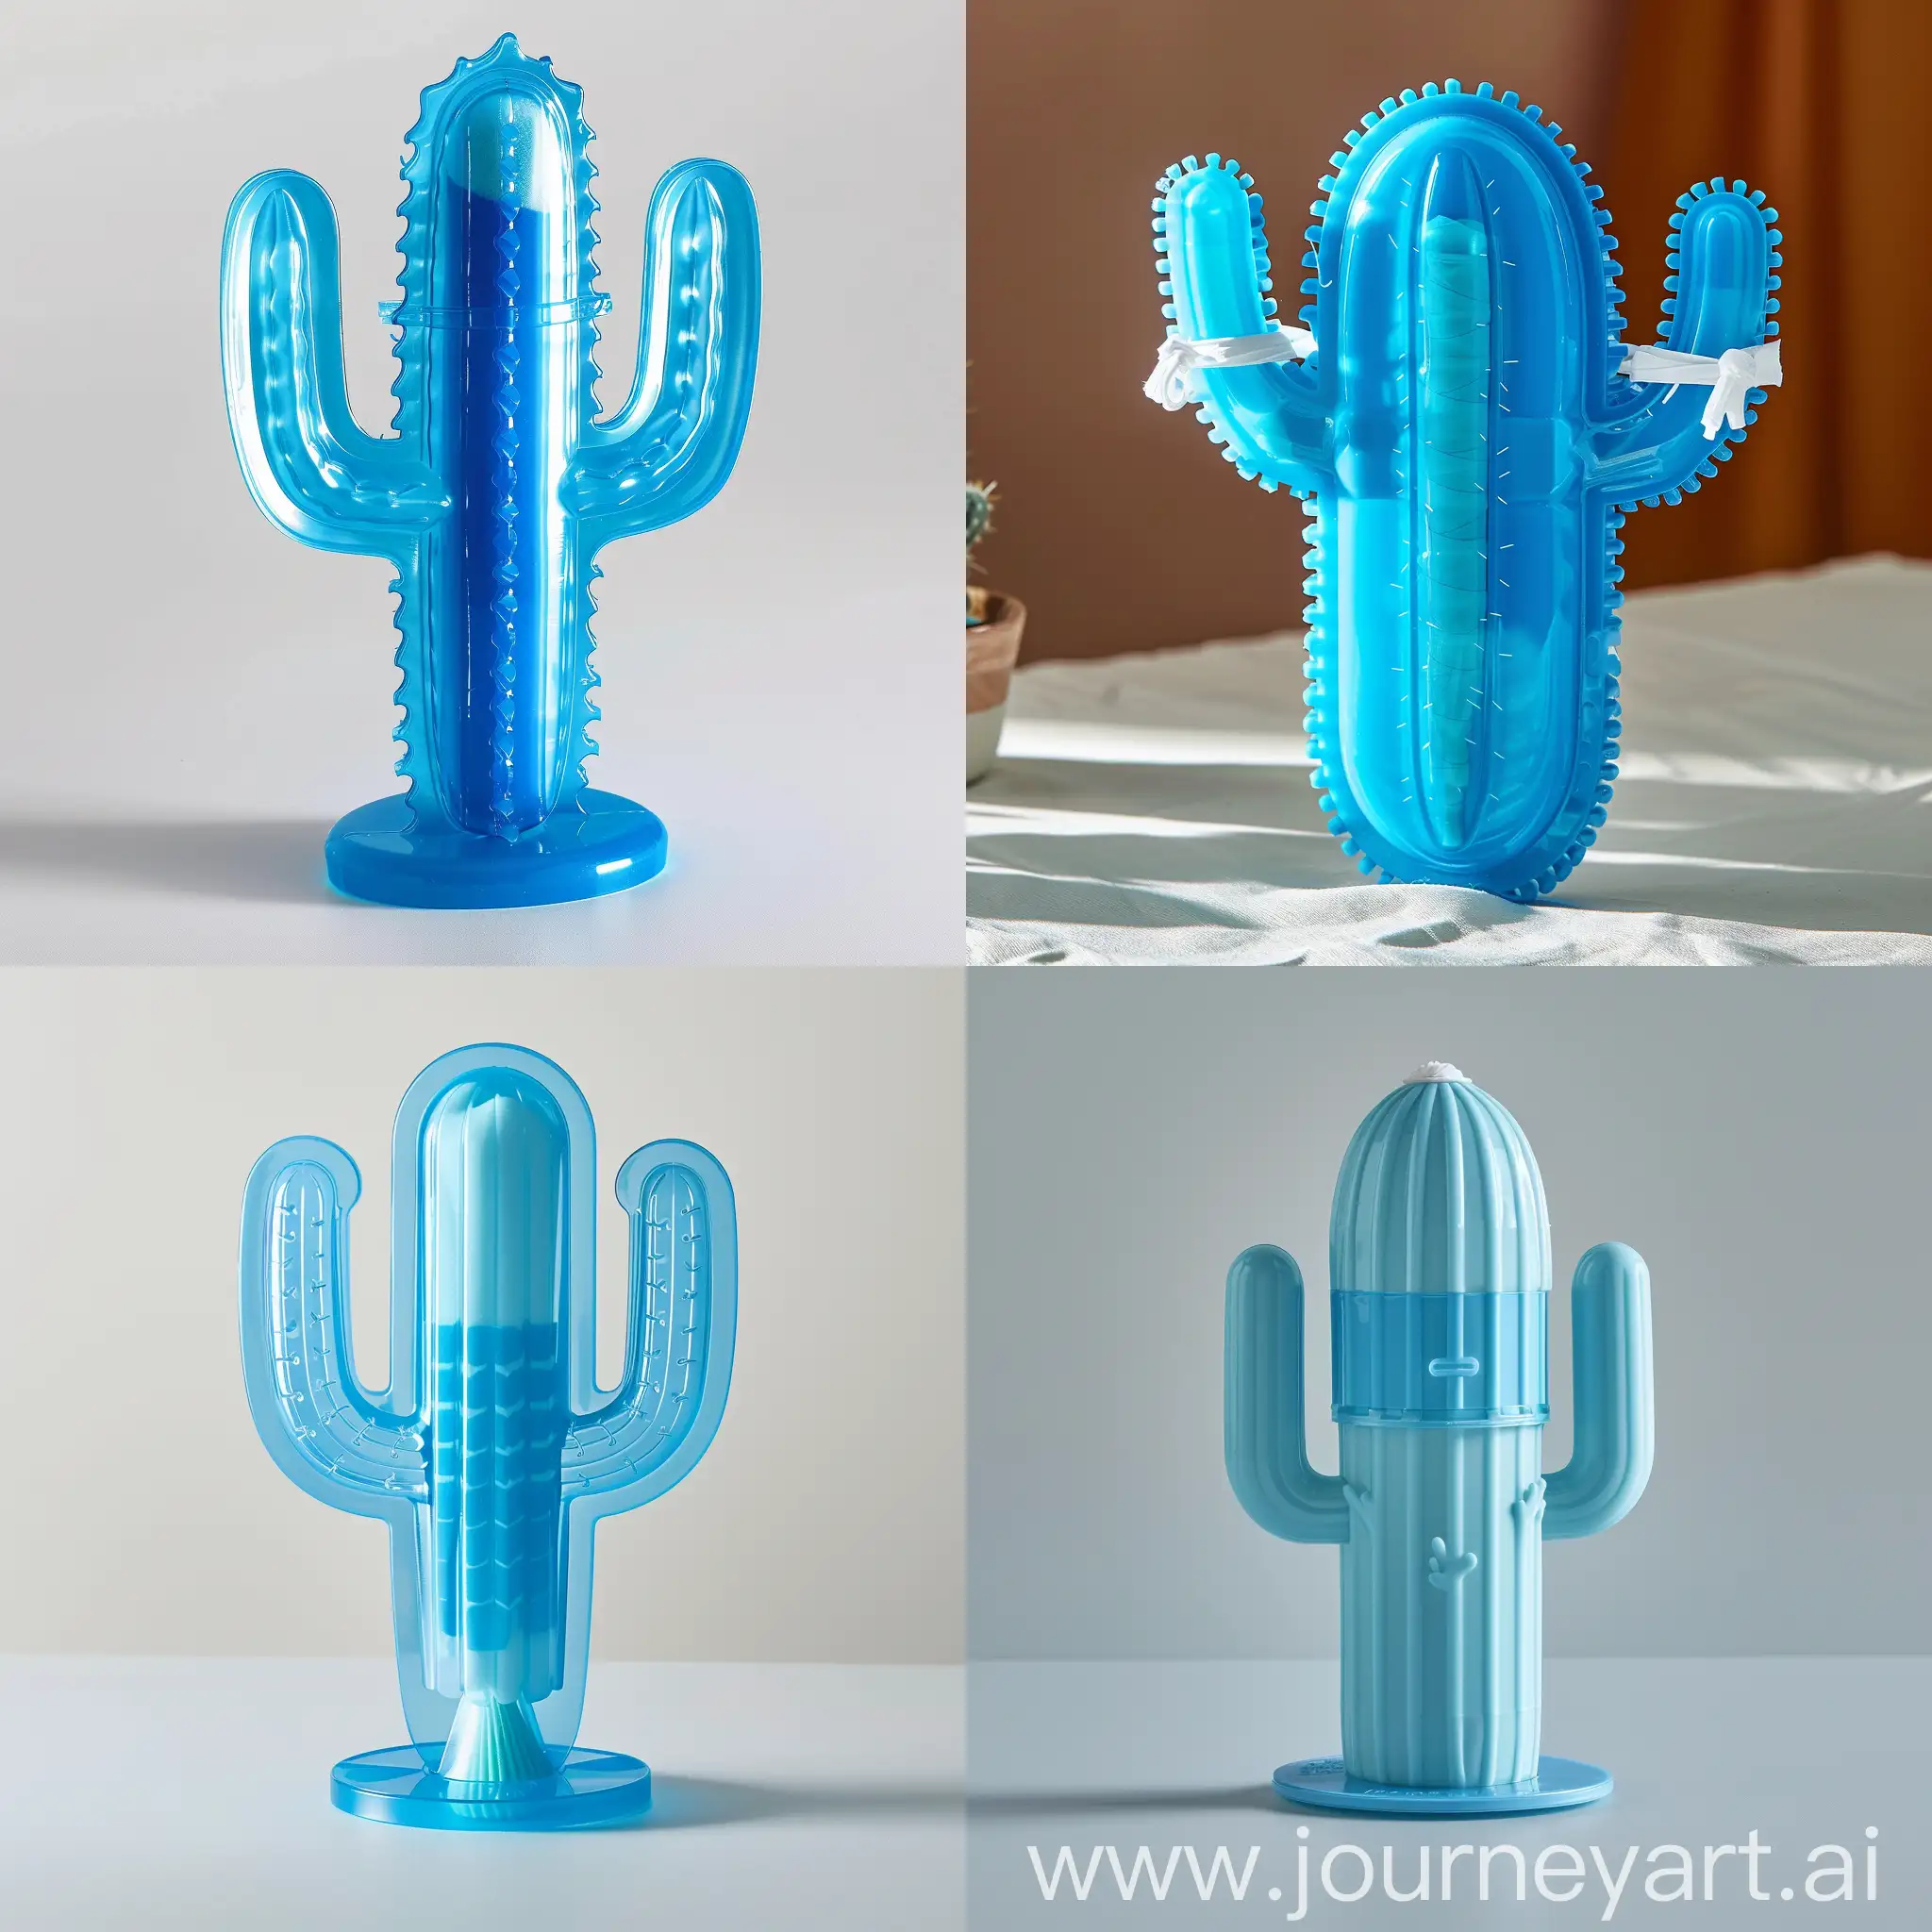 a tampon product in a blue plastic cover, but in the shape of a cactus, on its side